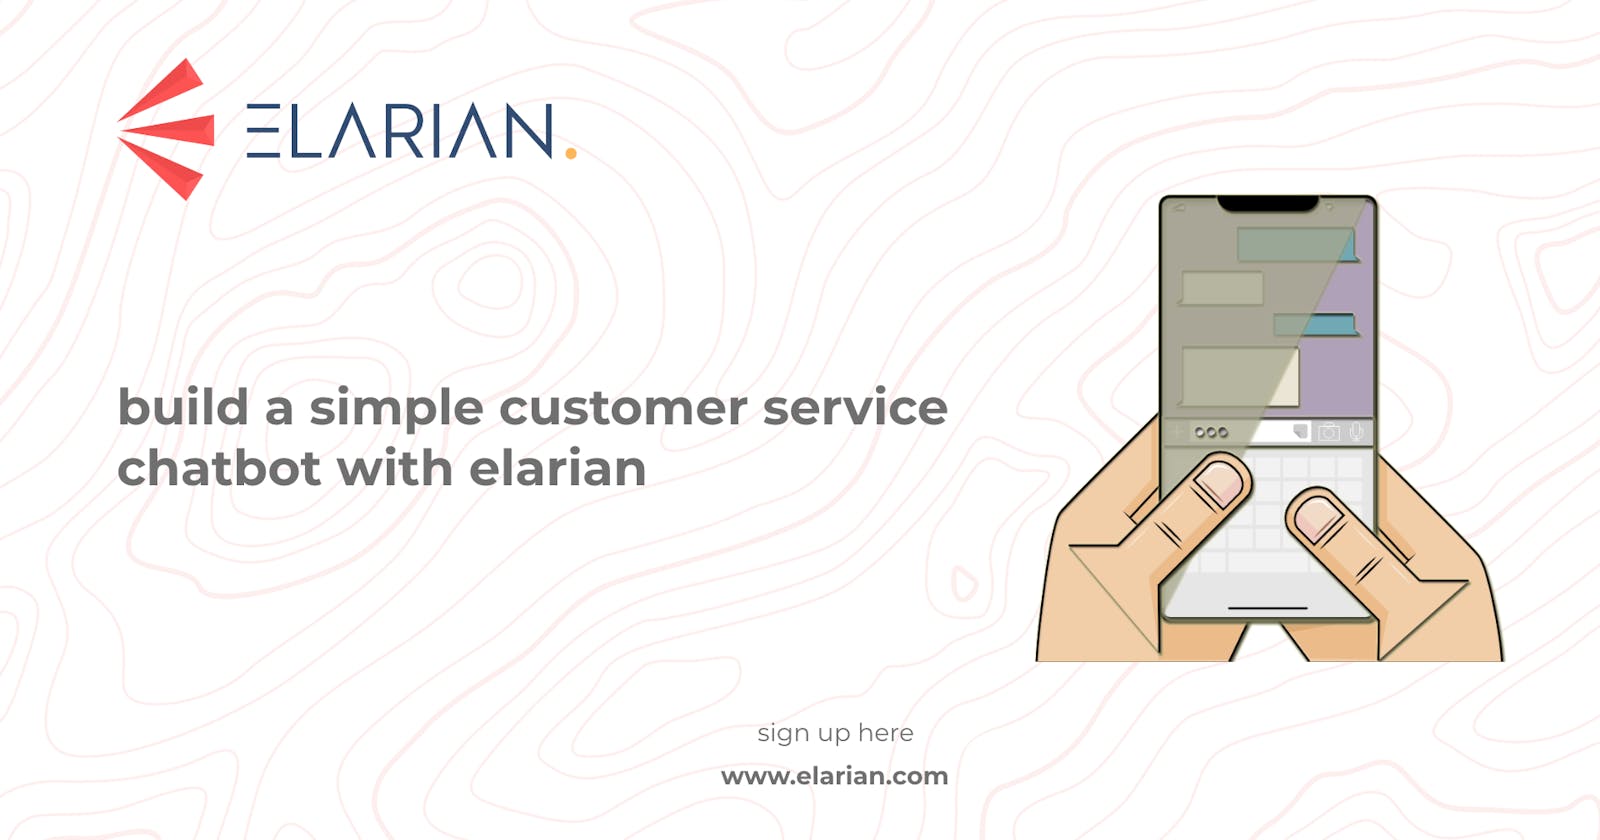 Build a Simple Customer Service Chatbot with Elarian